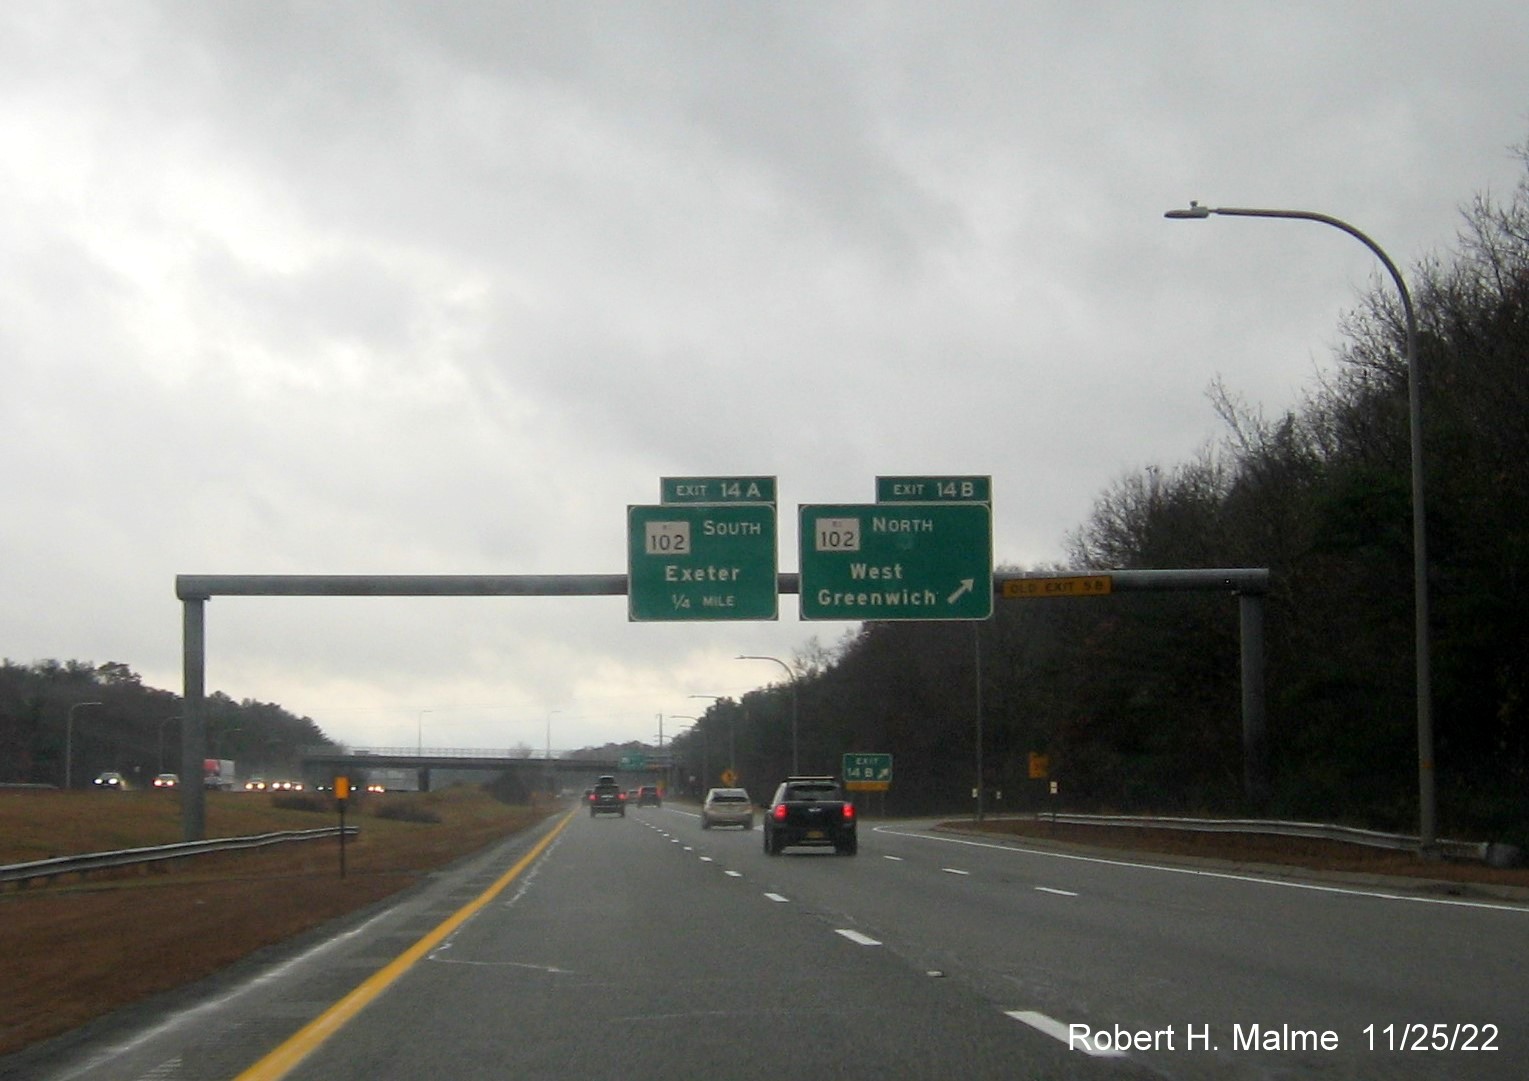 Image of overhead signage at ramp for RI 102 North exit with new milepost based exit numbers and yellow Old Exits 5B sign on gantry arm on I-95 South in West Greenwich, November 2022